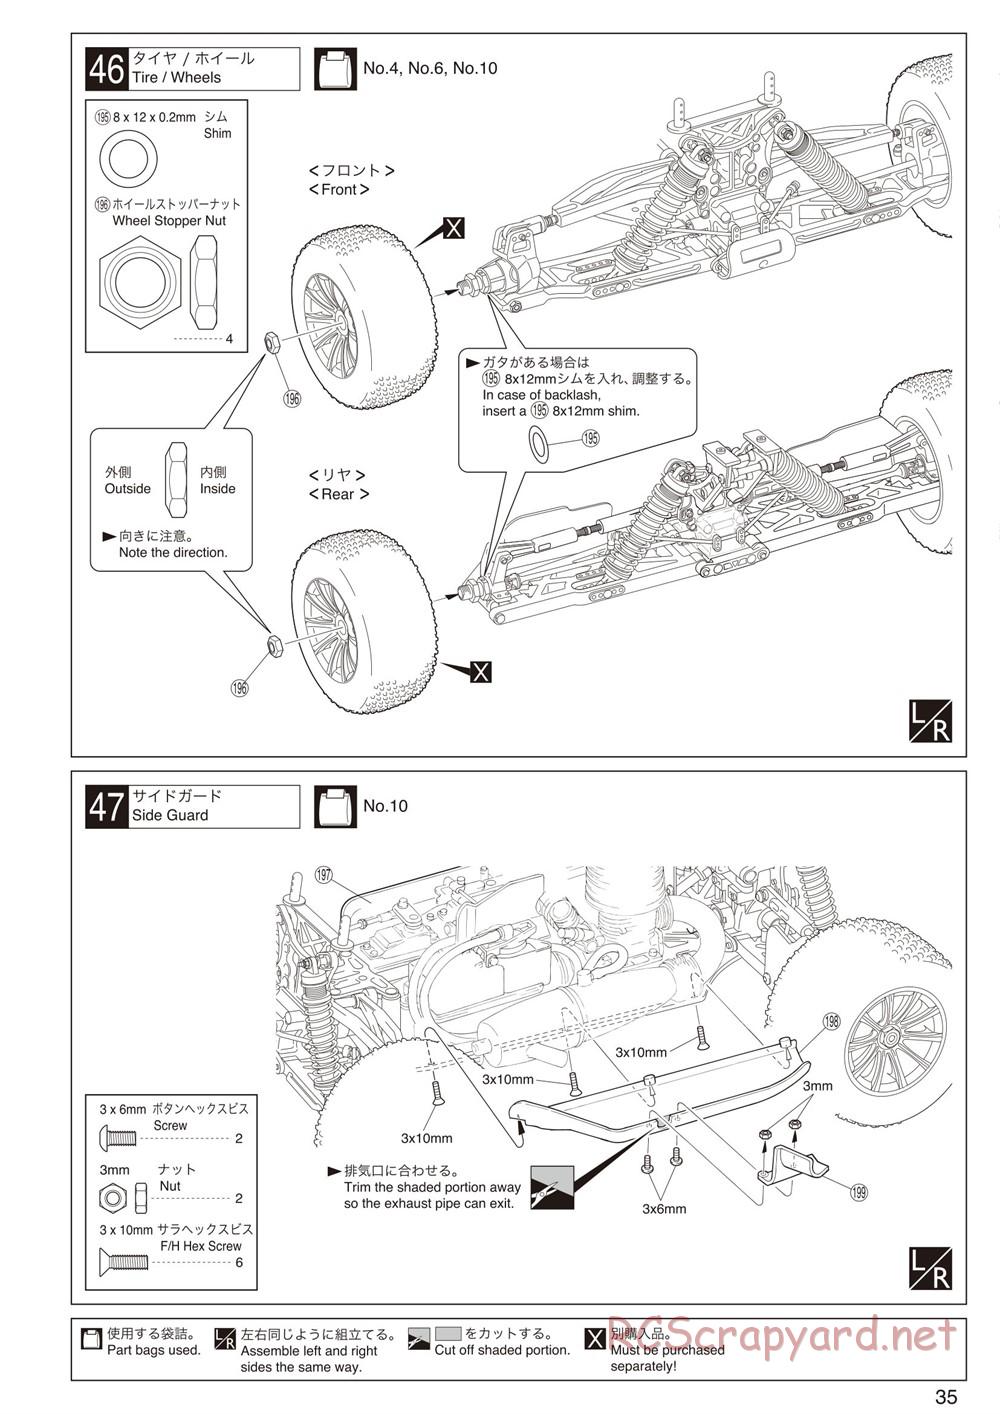 Kyosho - Inferno ST-RR Evo.2 - Manual - Page 39